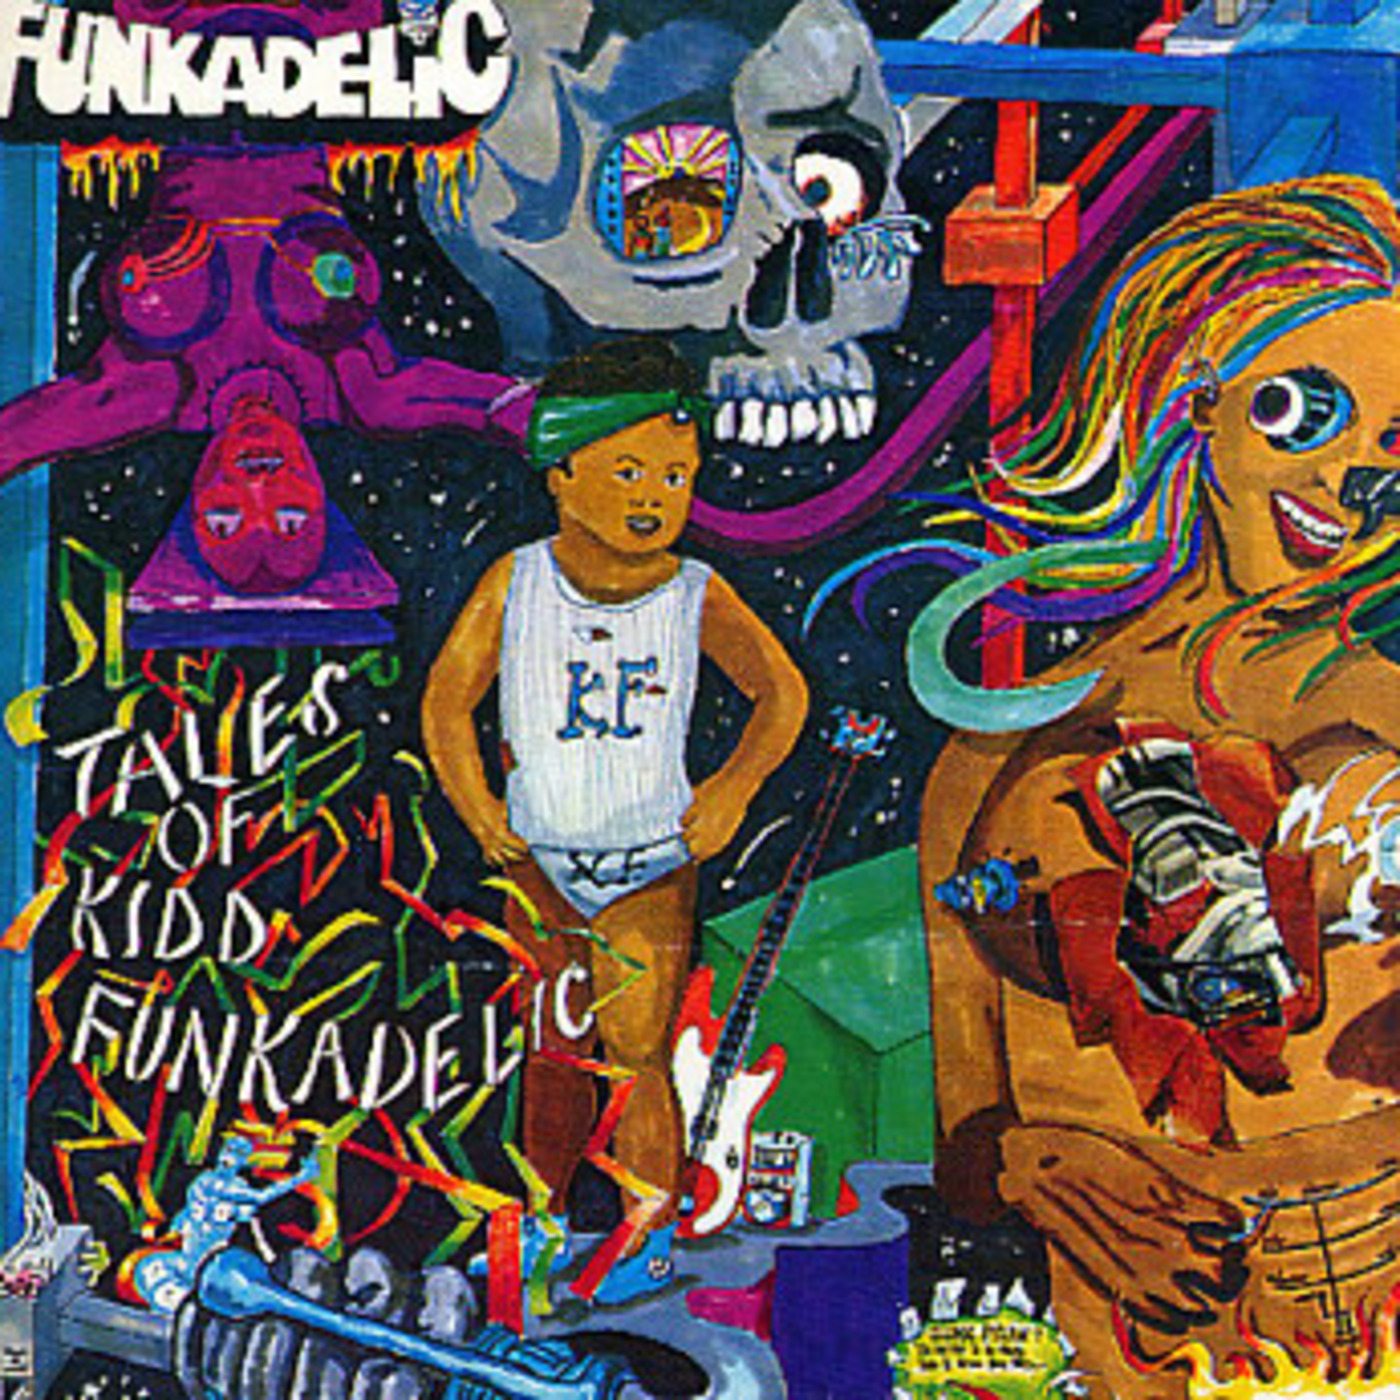 #30MINUTES BACK IN THE DAY #OLDSCHOOL FUNK  BLEND FT. THE #FUNKADELIC - 